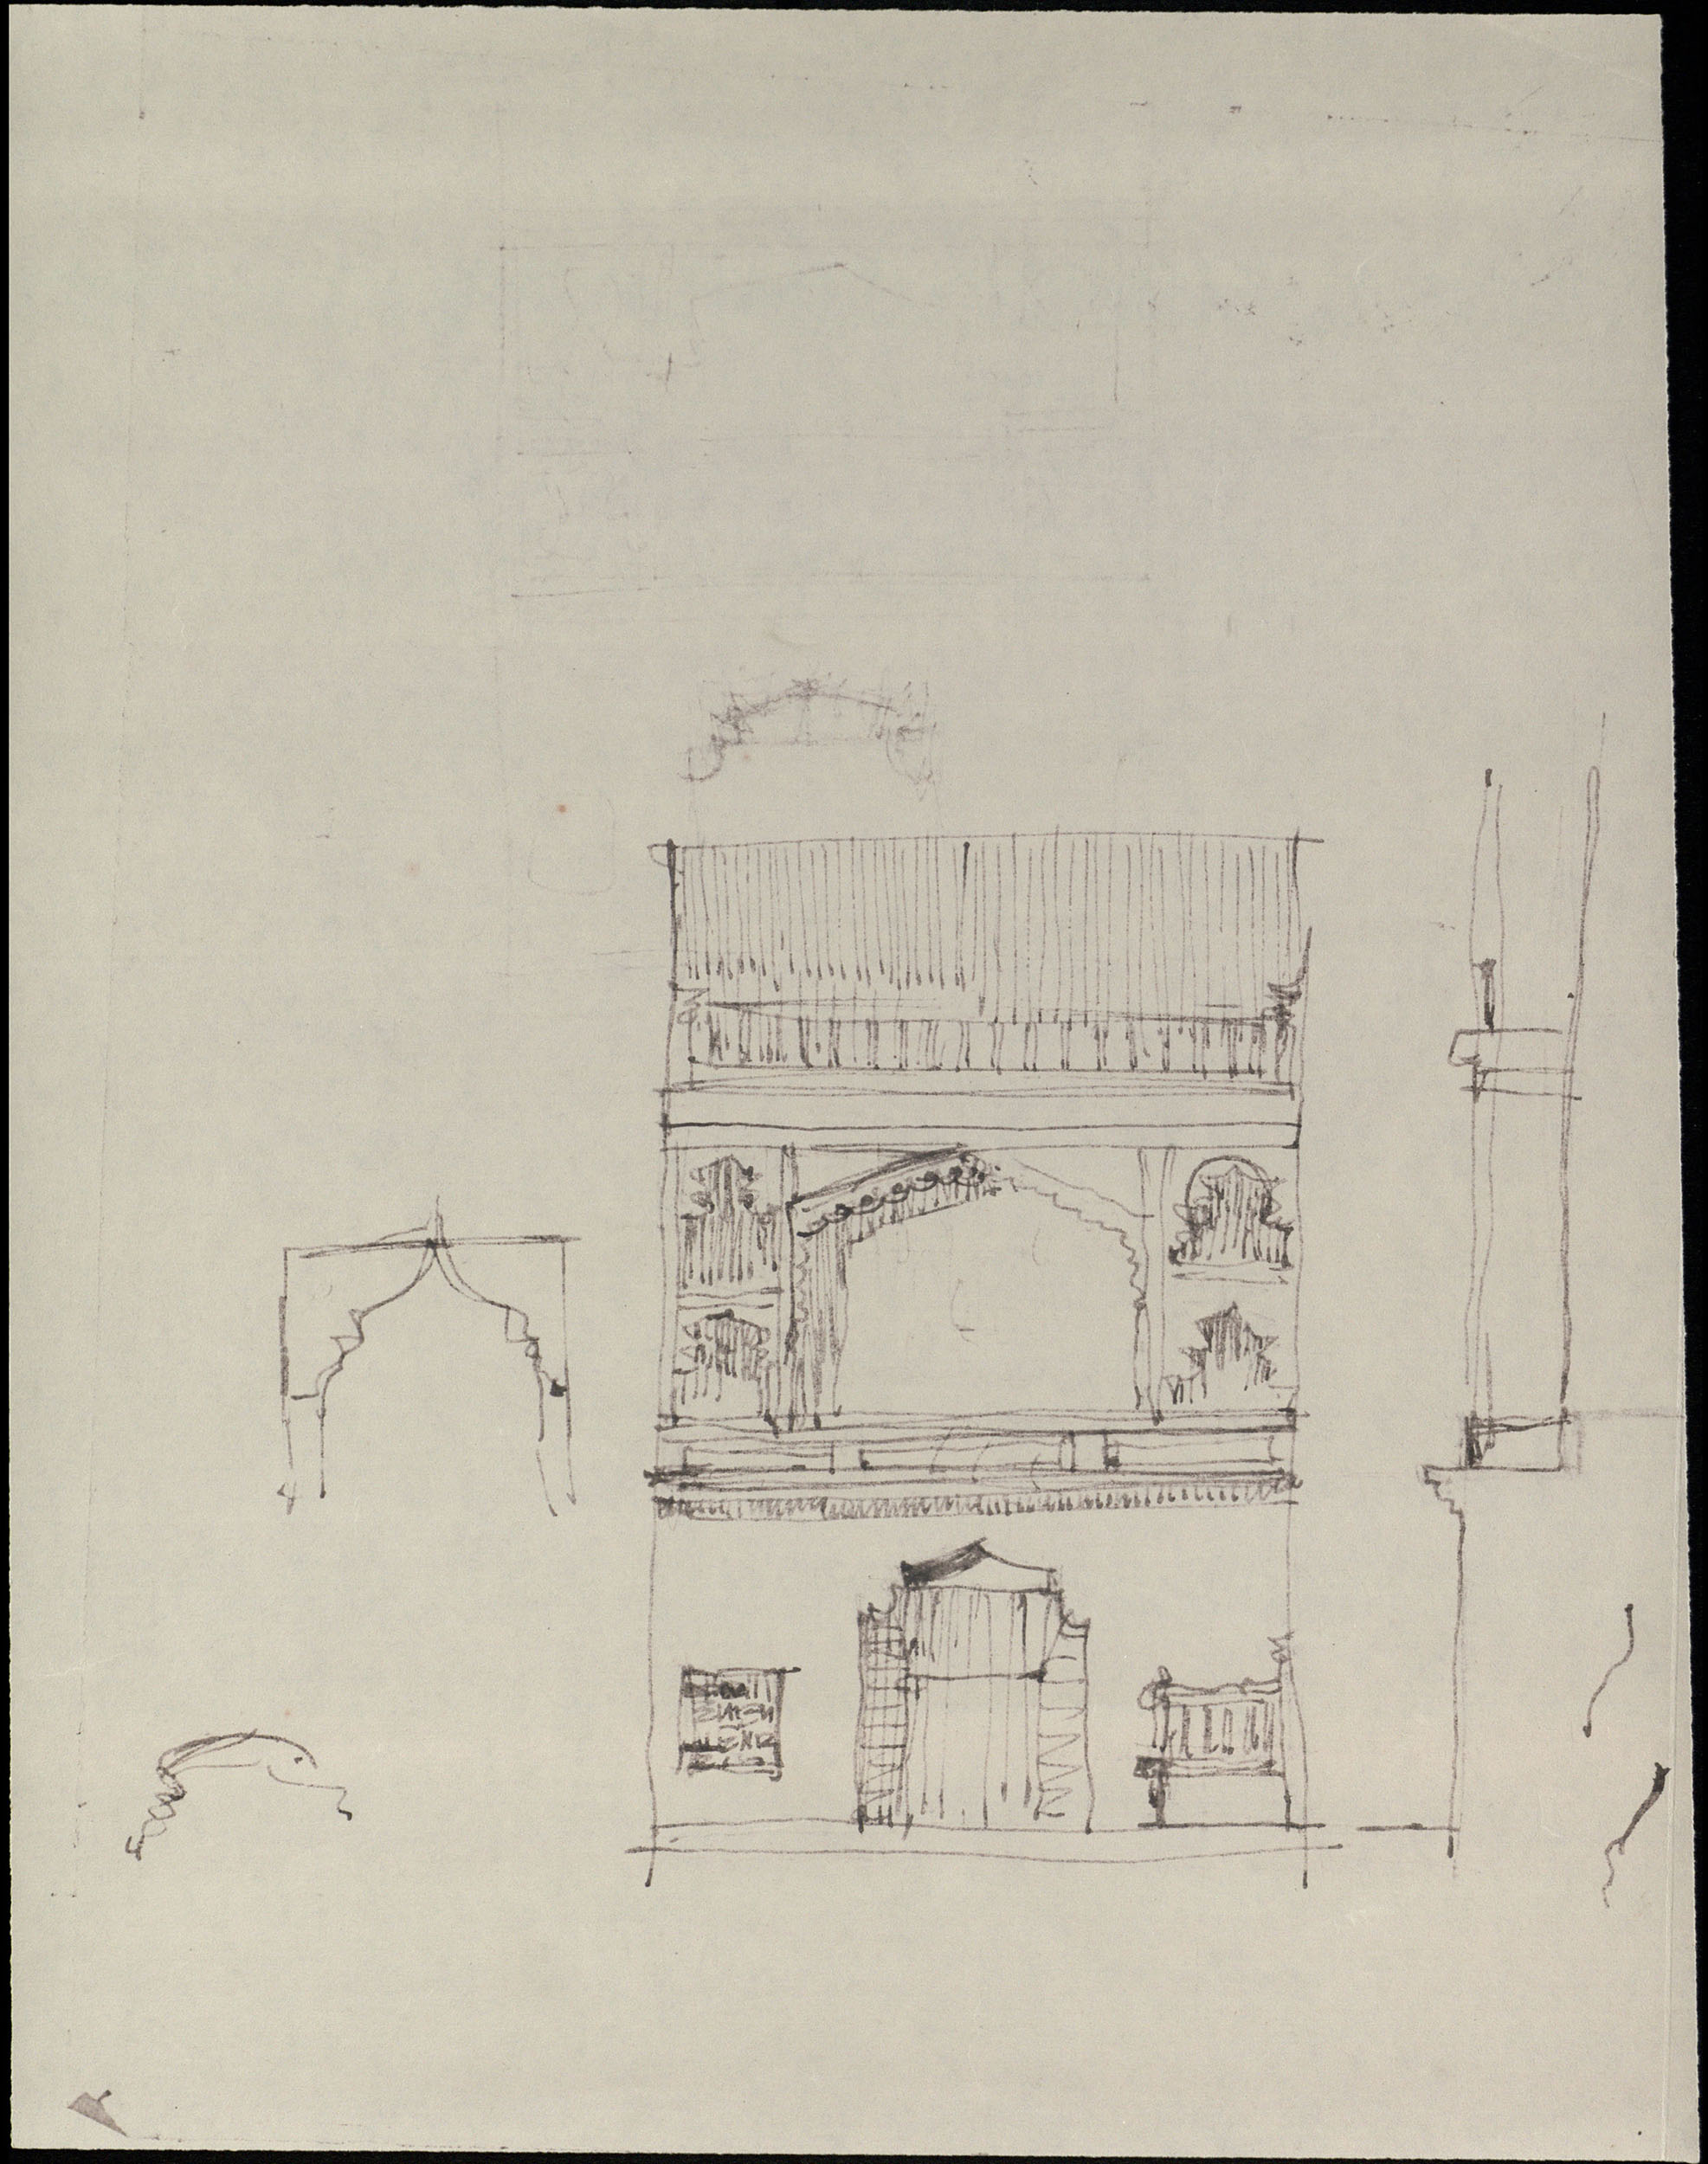 Hassan Fathy - Unidentified sketch, possibly of a building façade